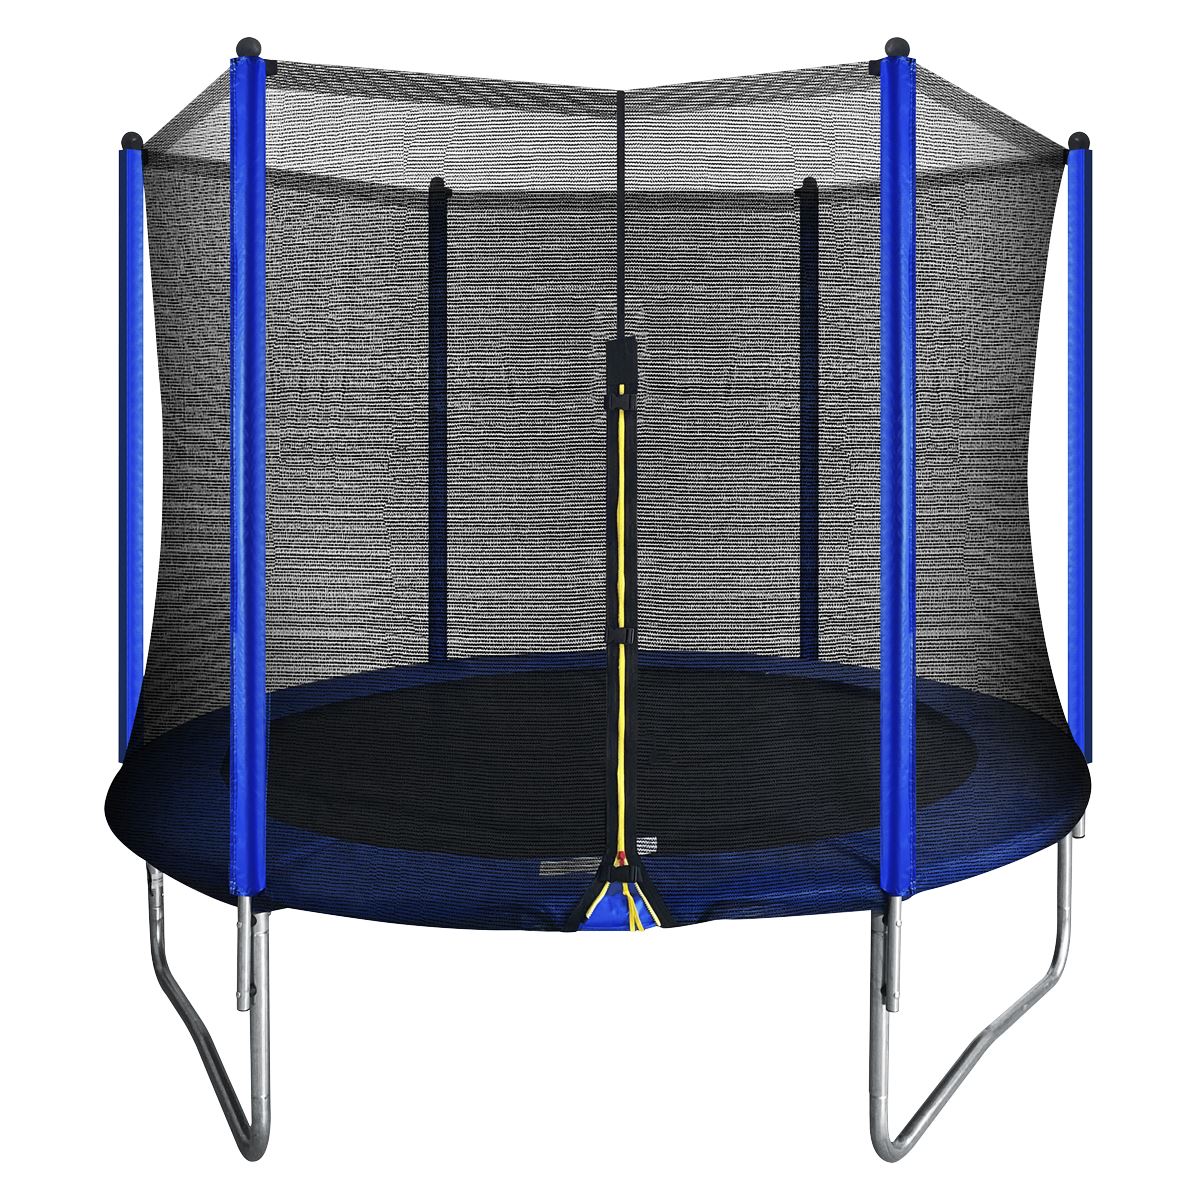 Dellonda 8ft Heavy-Duty Outdoor Trampoline with Safety Enclosure Net